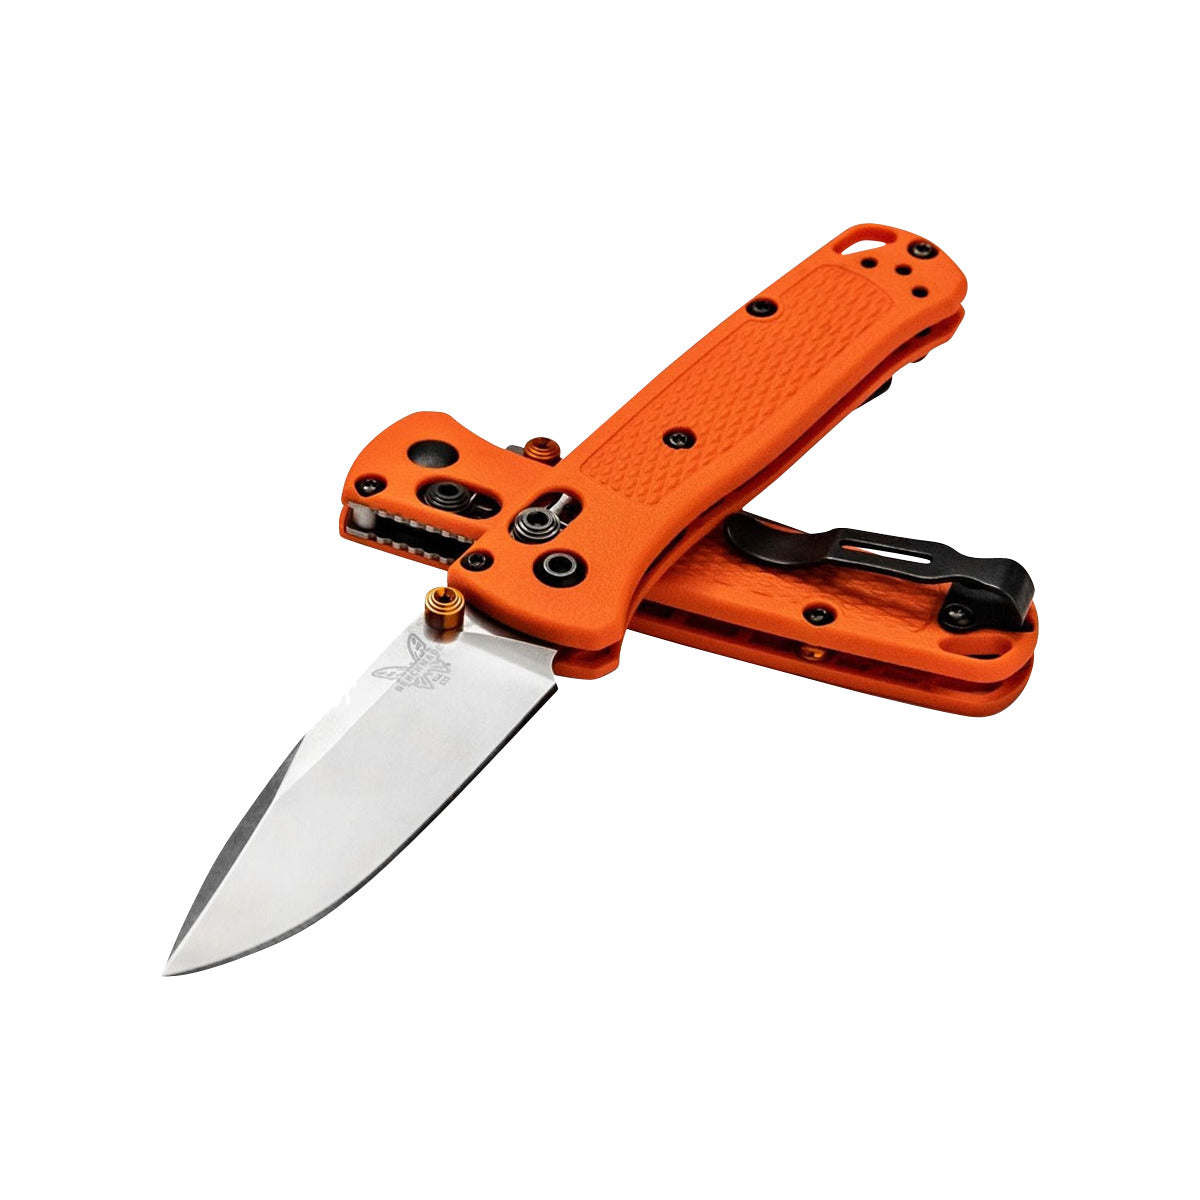 Shop for Benchmade 533 Mini Bugout | GOHUNT